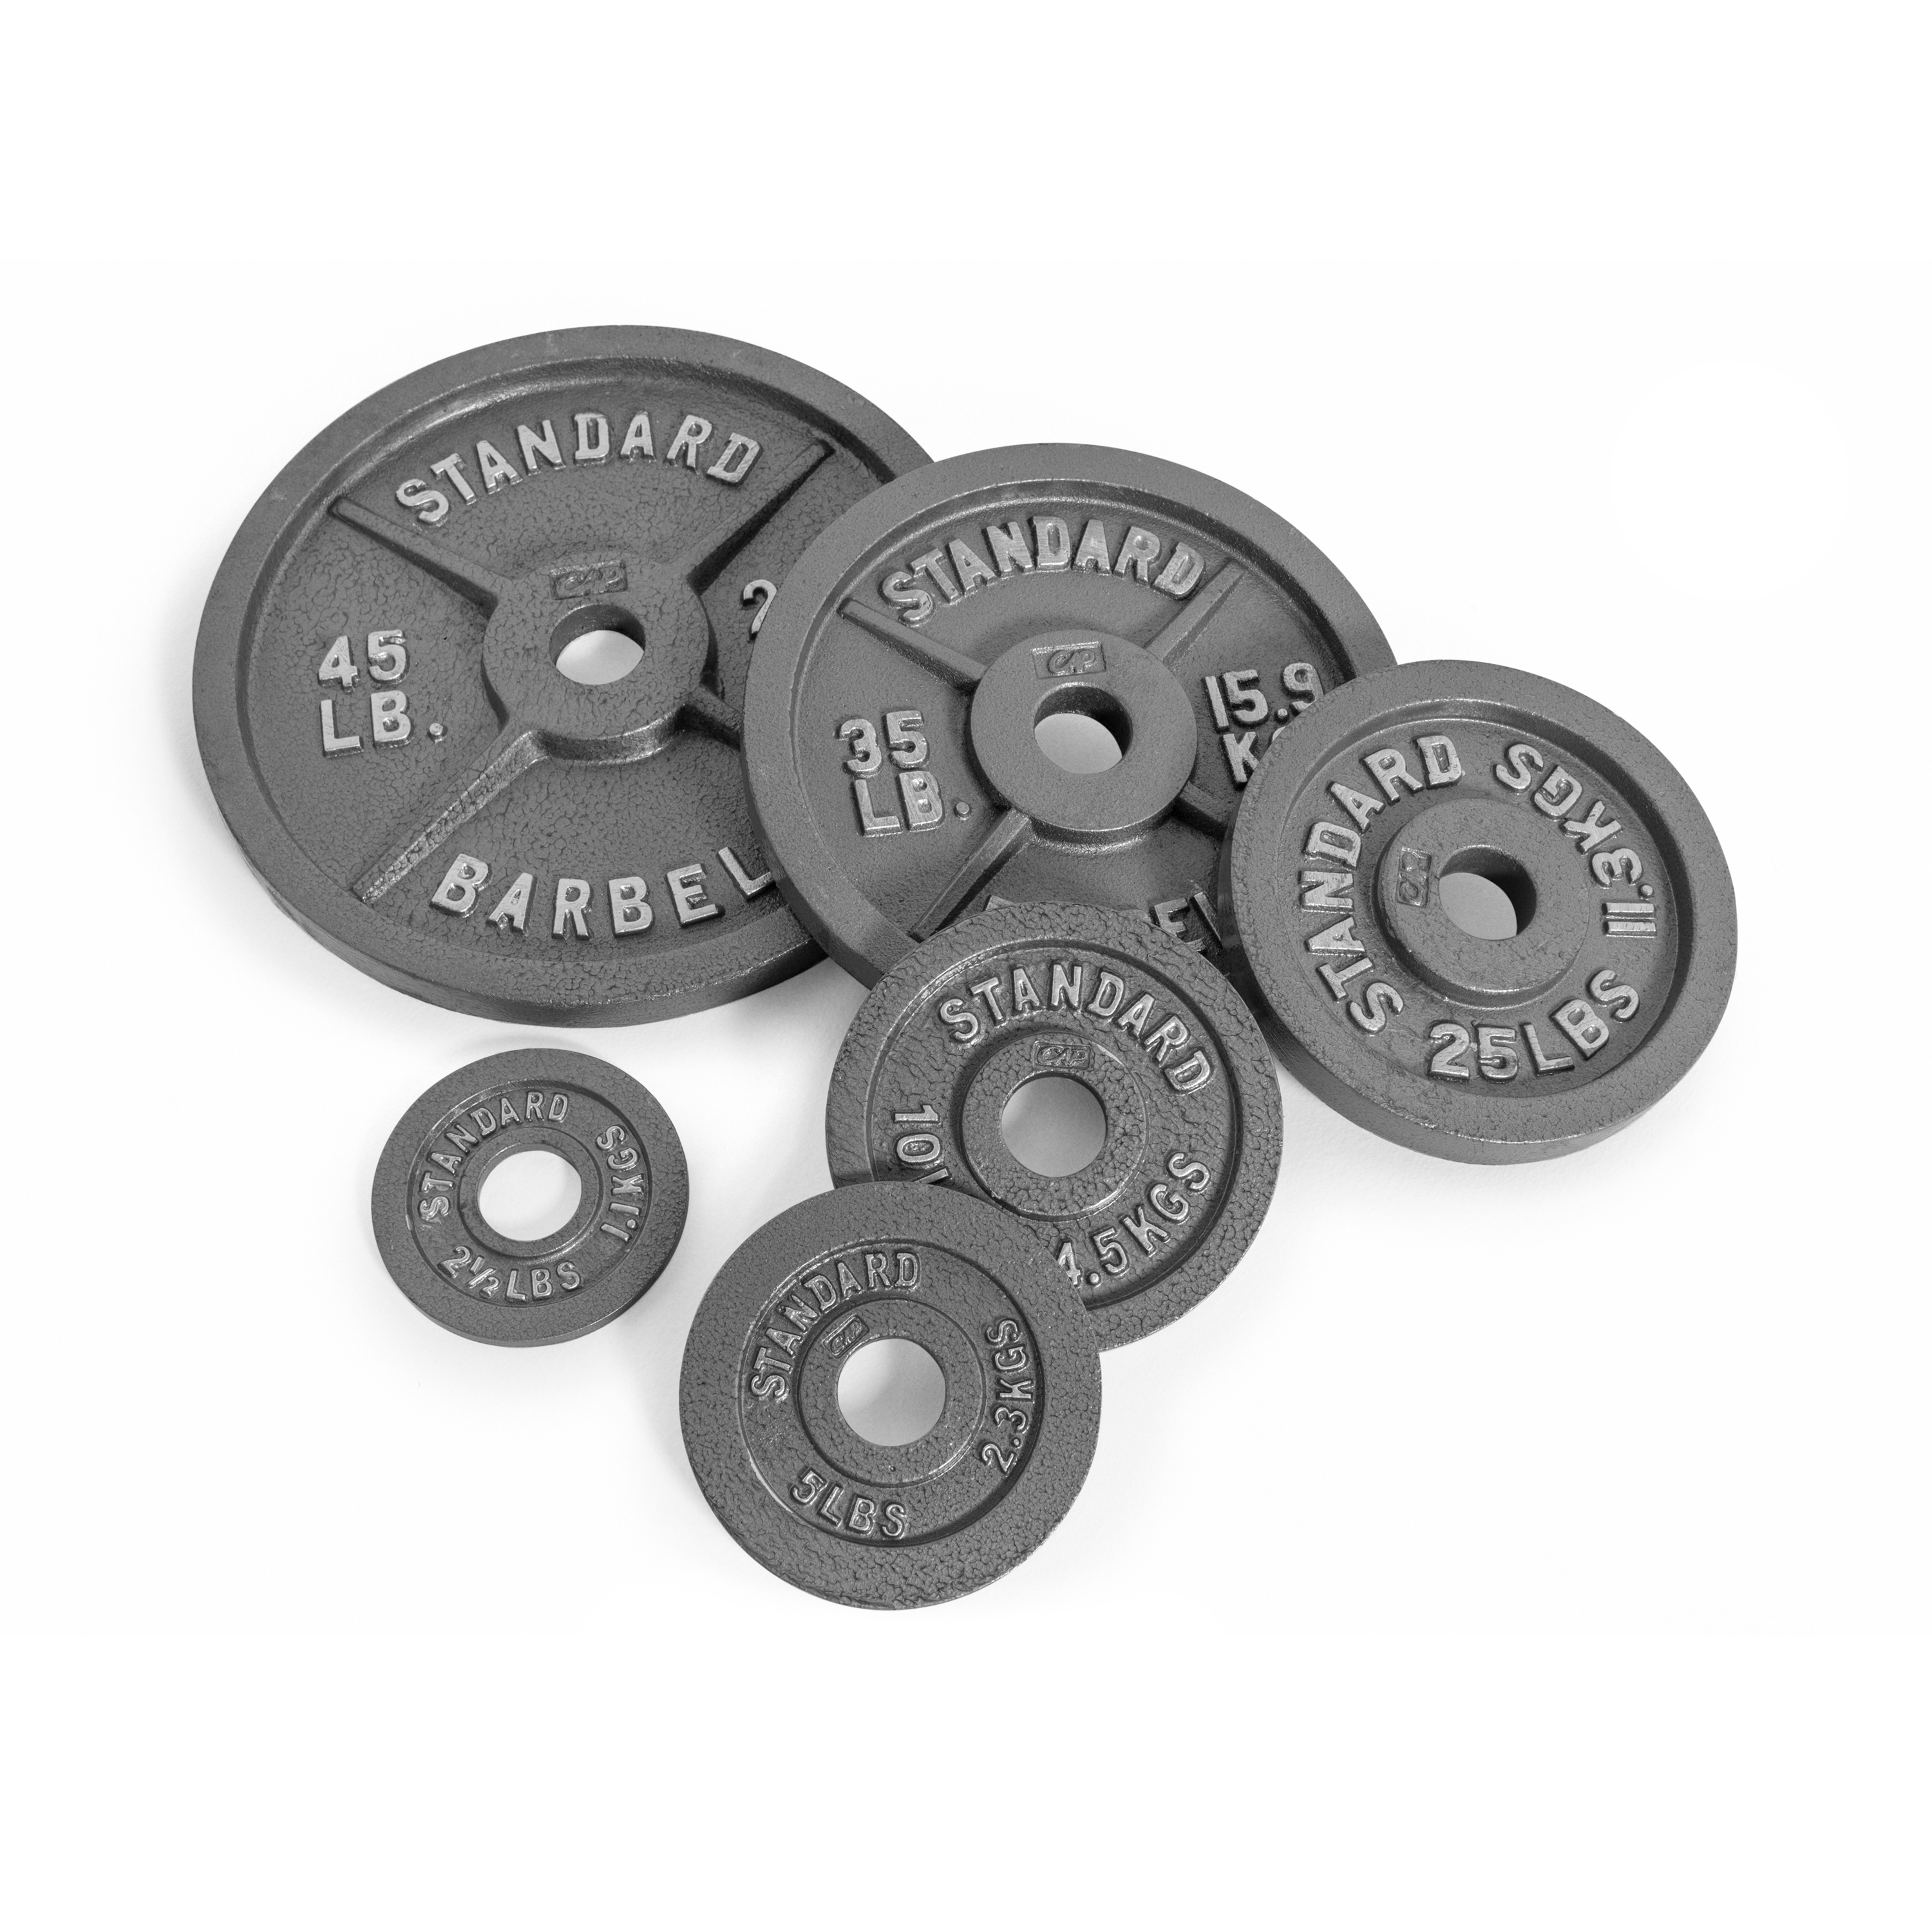 CAP Barbell Gray Olympic Cast Iron Weight Plate, 25 lb - image 2 of 2